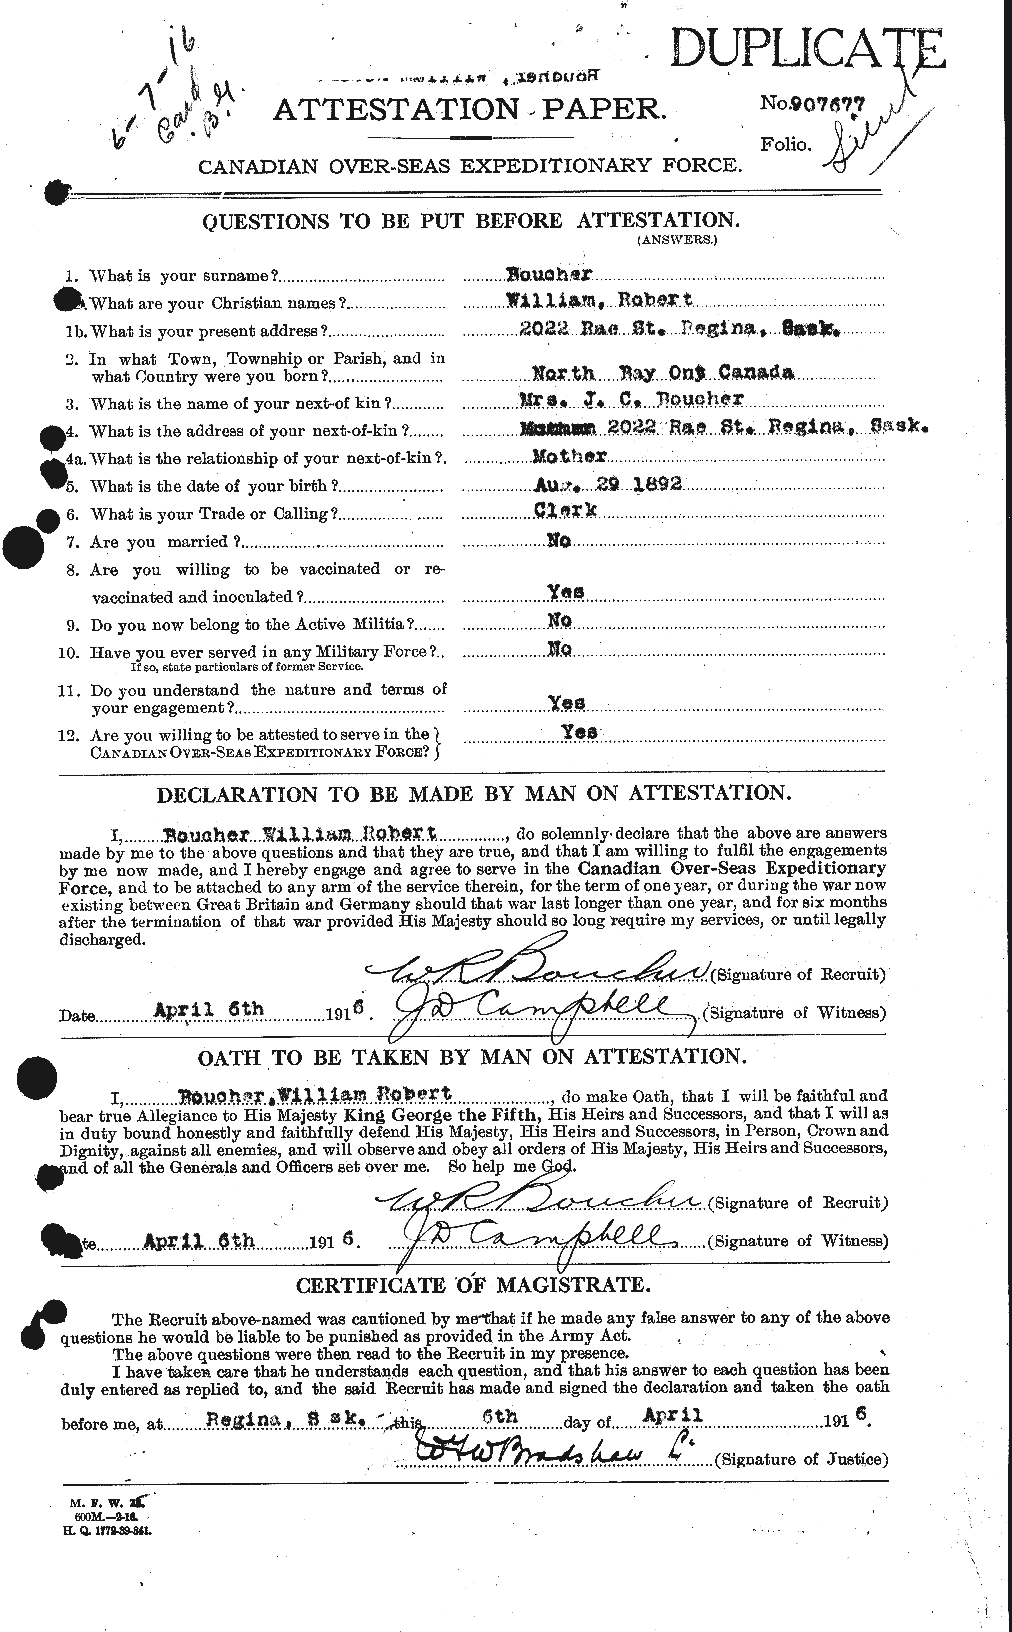 Personnel Records of the First World War - CEF 255604a